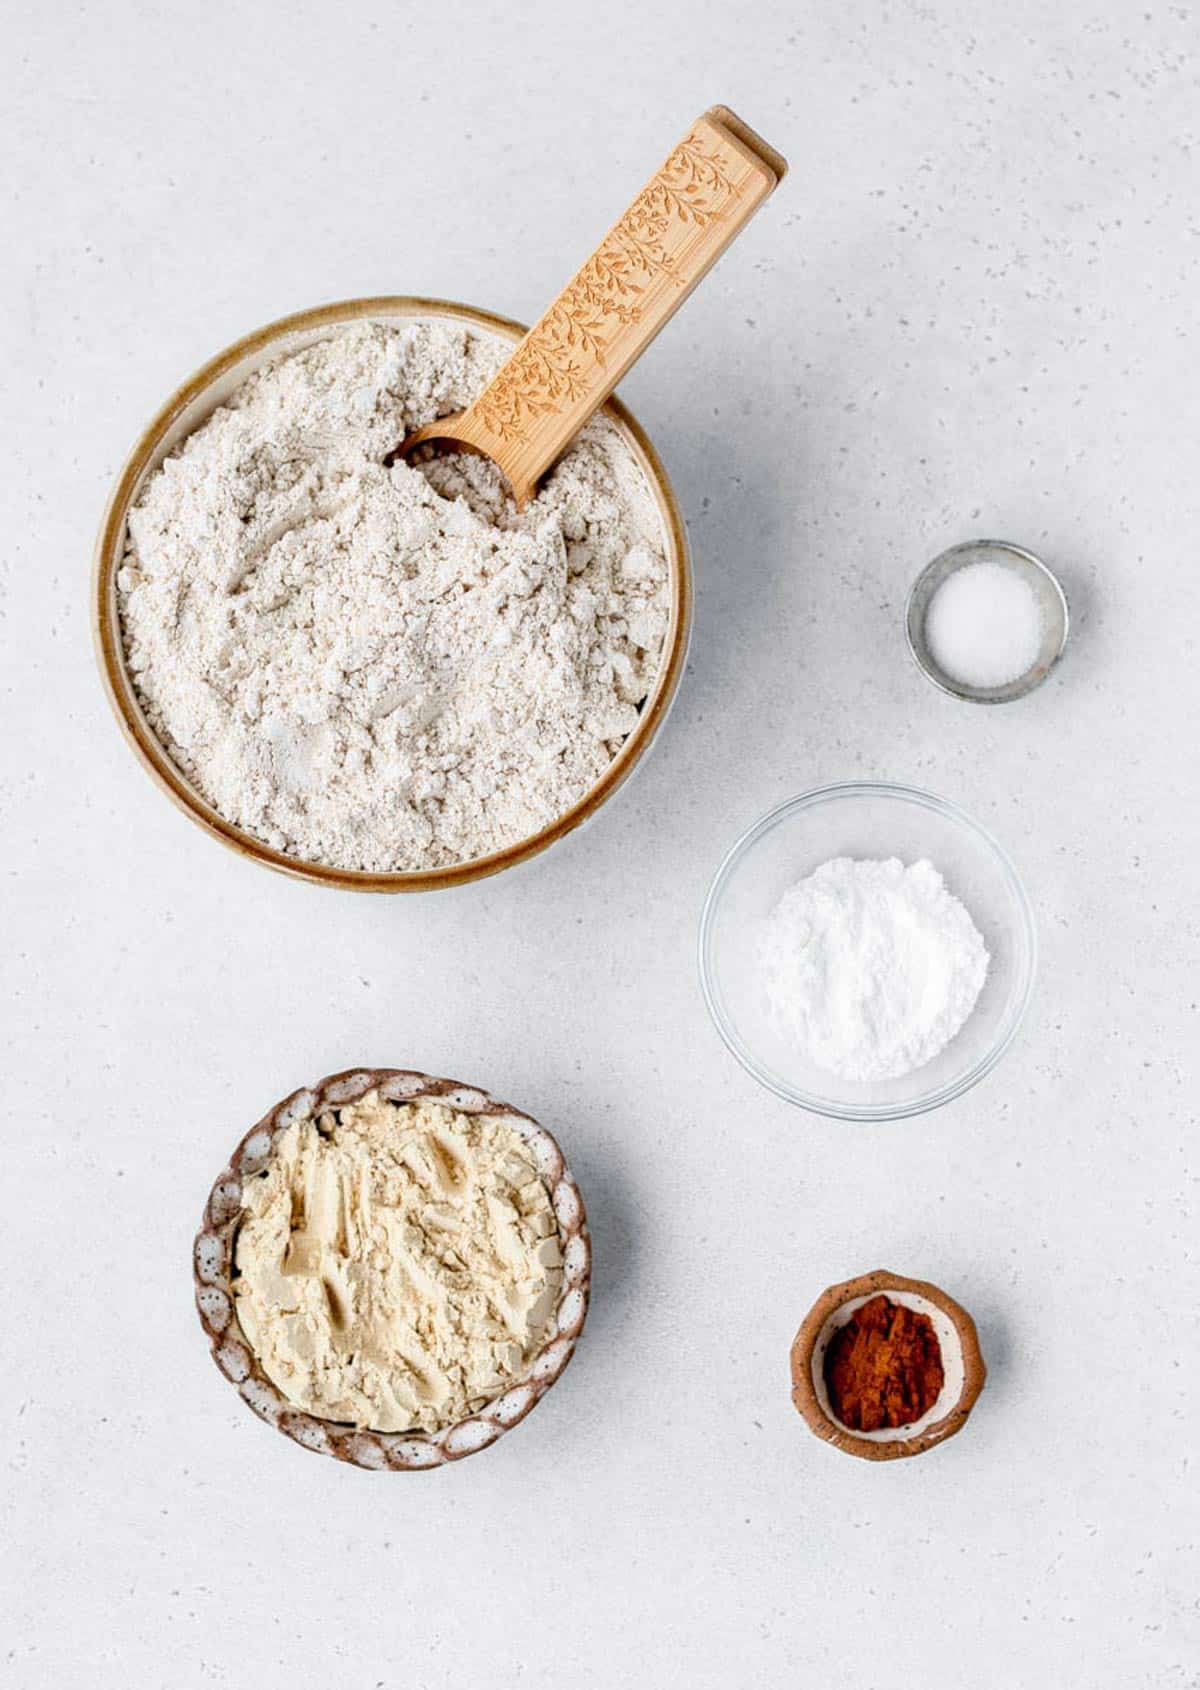 The ingredients for protein pancake mix recipe, including oat flour, vanilla protein powder, cinnamon, salt and baking powder.